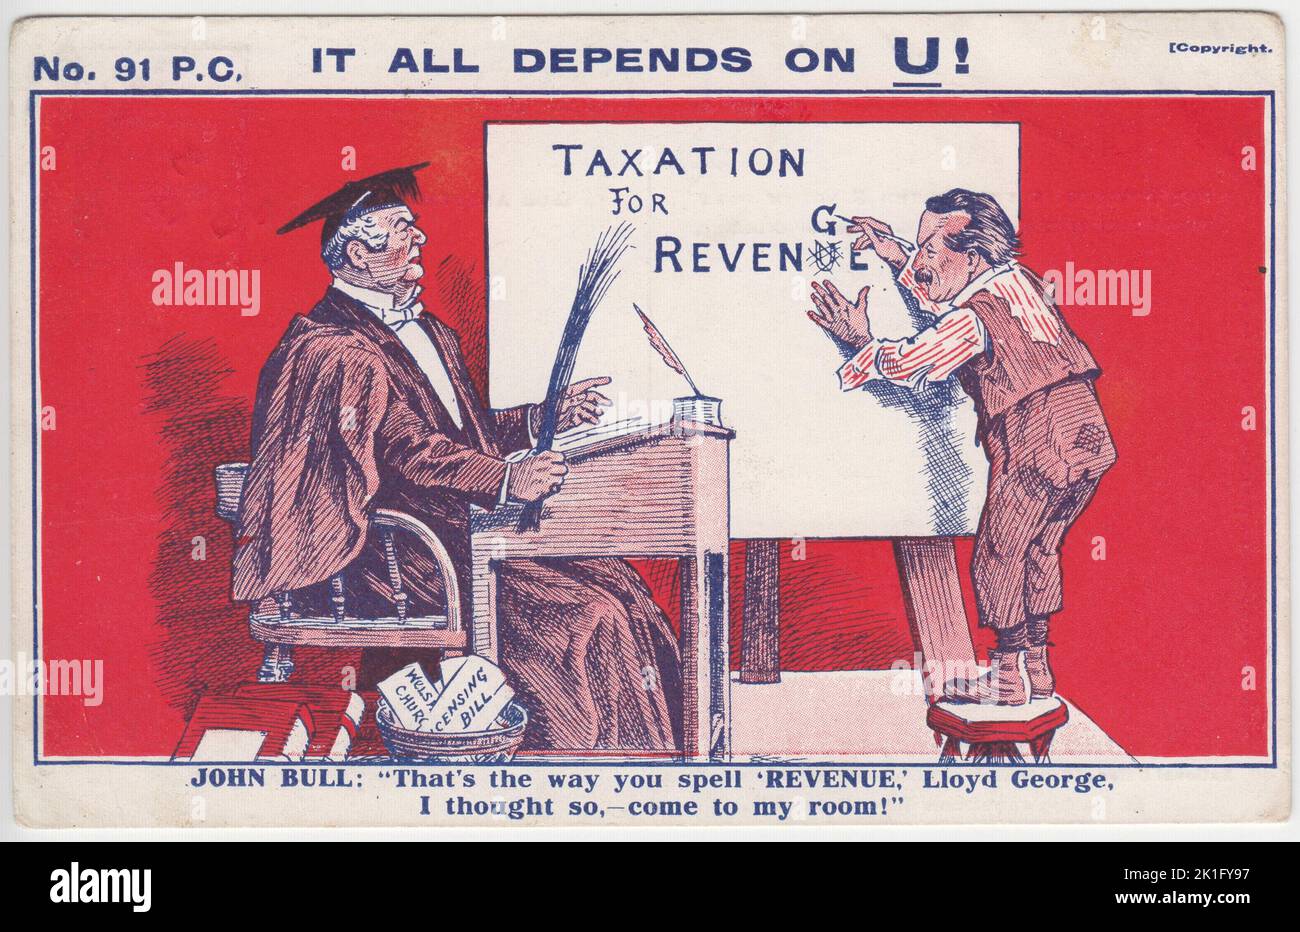 'It all depends on U! John Bull: 'That's the way you spell 'REVENUE,' Lloyd George, I though so, - come to my room!': Postcard published by the National Union of Conservative and Constitutional Associations, posted in 1912. It shows John Bull as a stern teacher, in gown and mortar board hat, seated at a desk and holding a handful of birch twigs. He is watching David Lloyd George, dressed as a ragged schoolboy, misspelling 'Taxation for Revenue' as 'Taxation for Revenge'. Papers marked 'Licensing Bill' and 'Welsh Church' are in a bin by the teacher Stock Photo